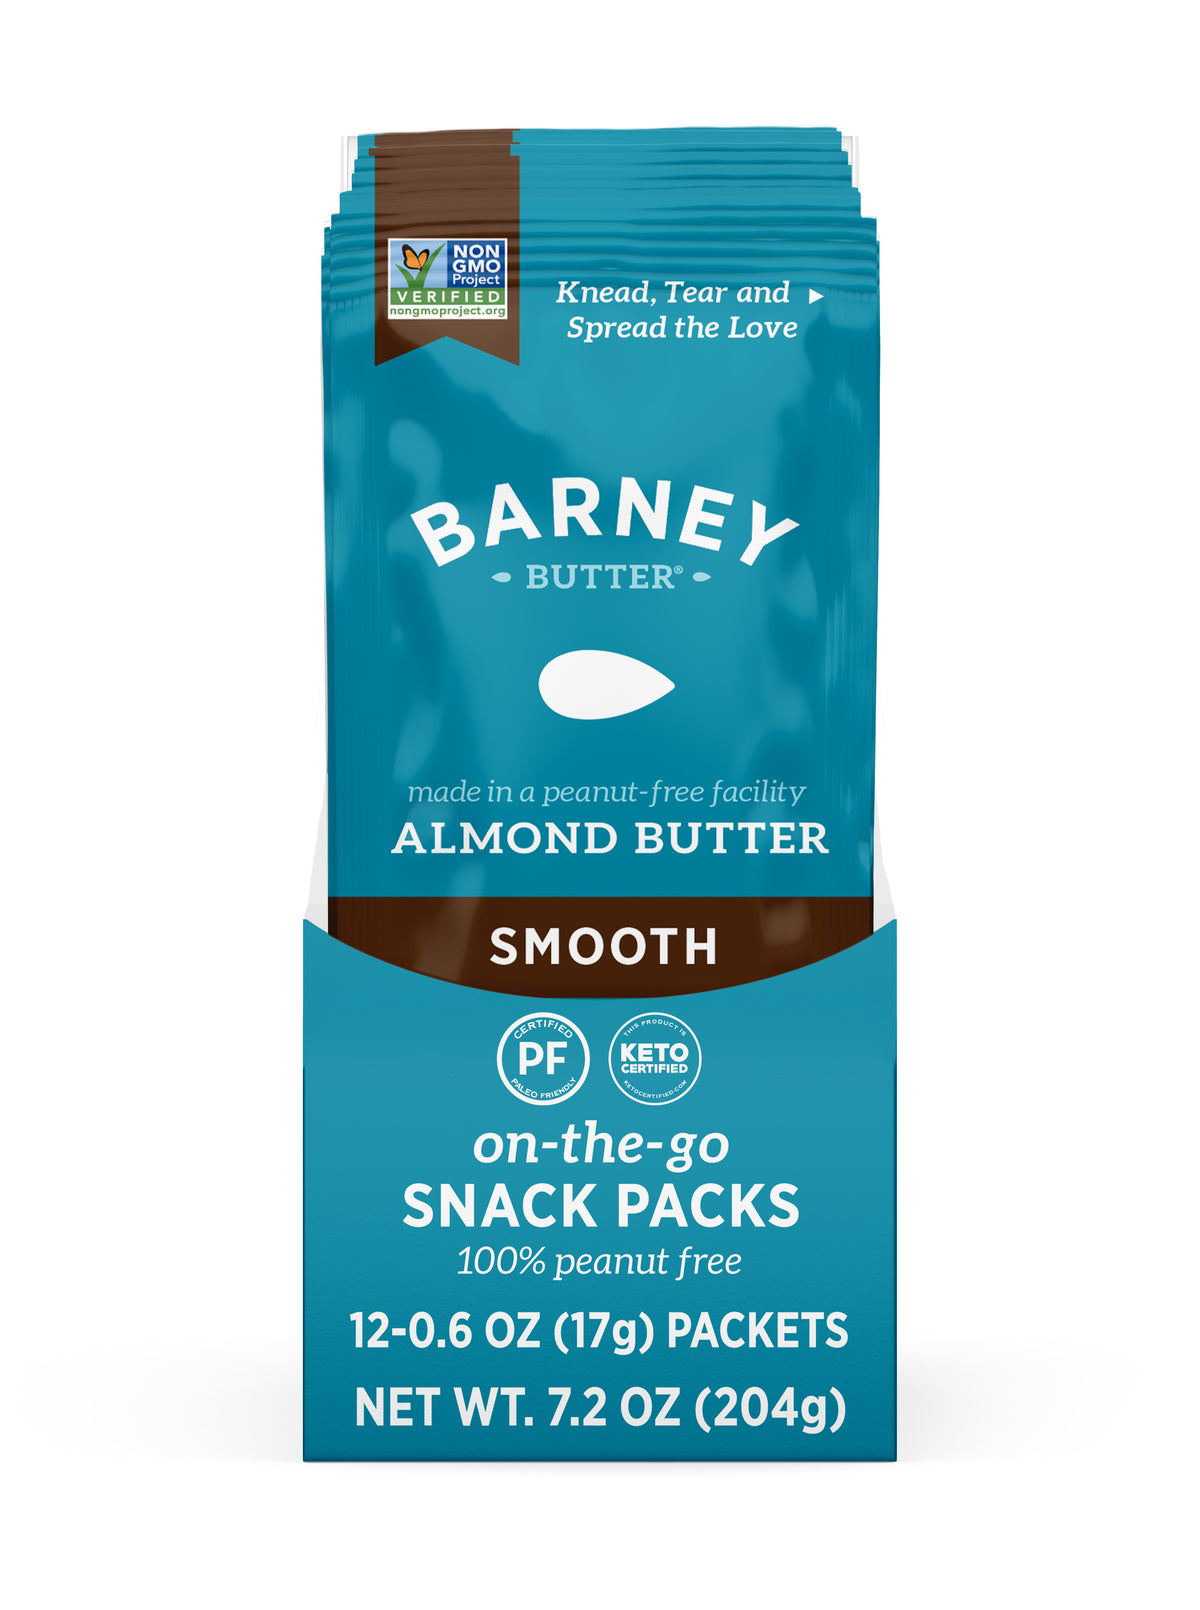 Smooth Almond Butter Snack Pack